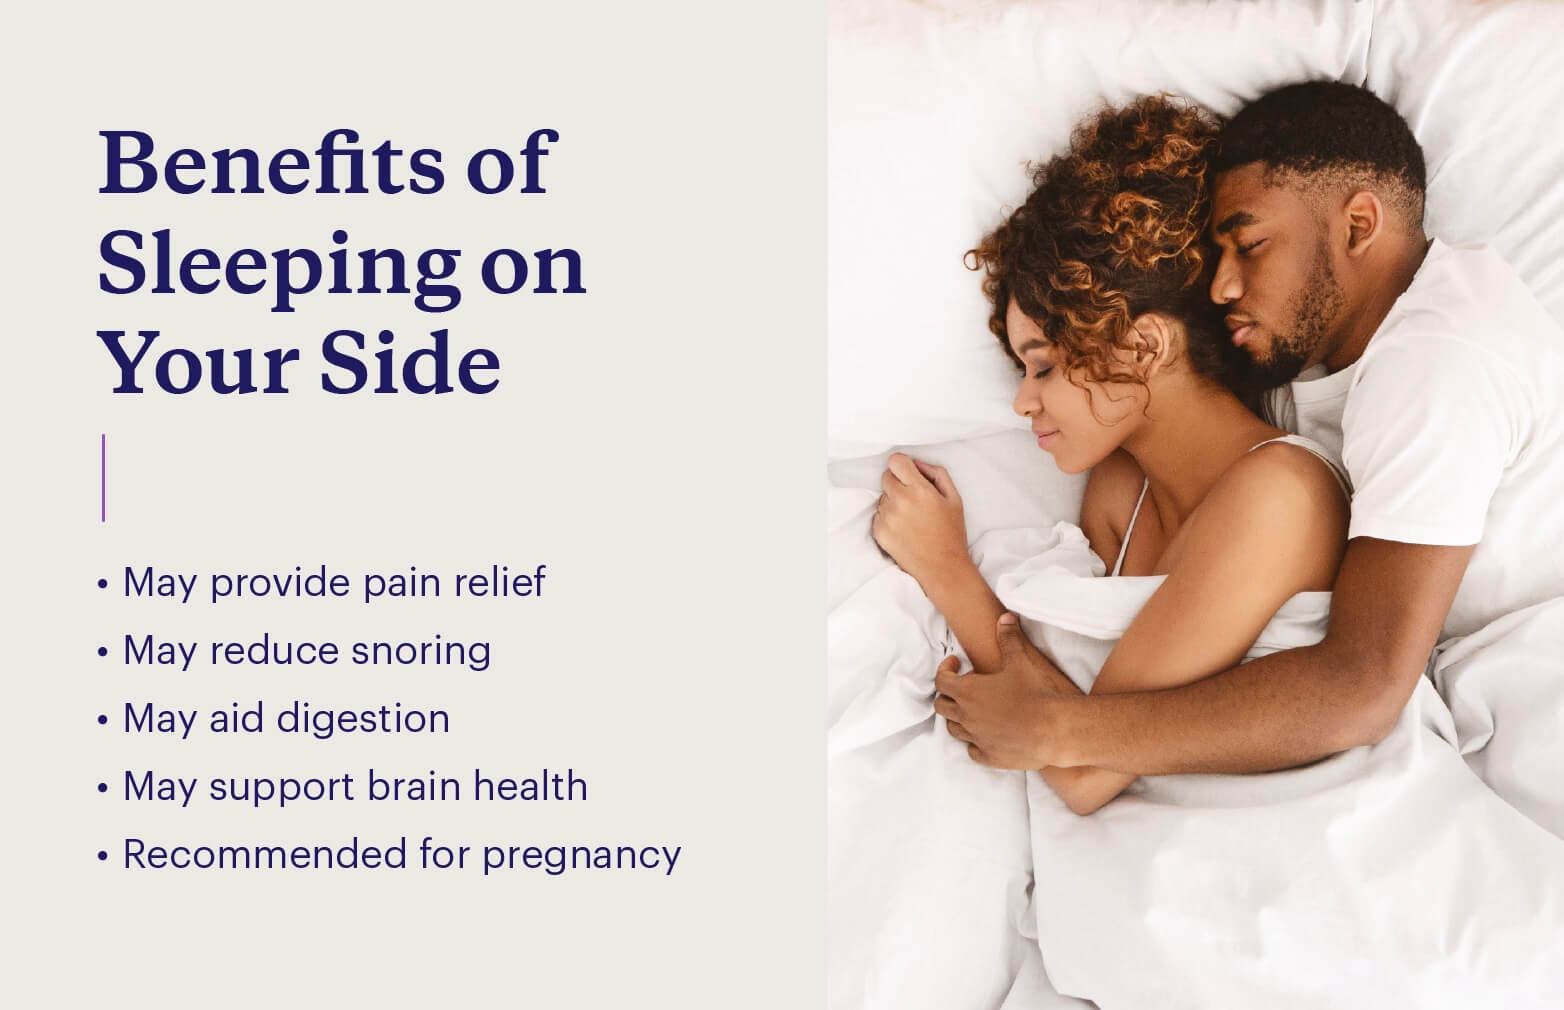 Five benefits of side sleeping with a photo of a couple sleeping on their sides.